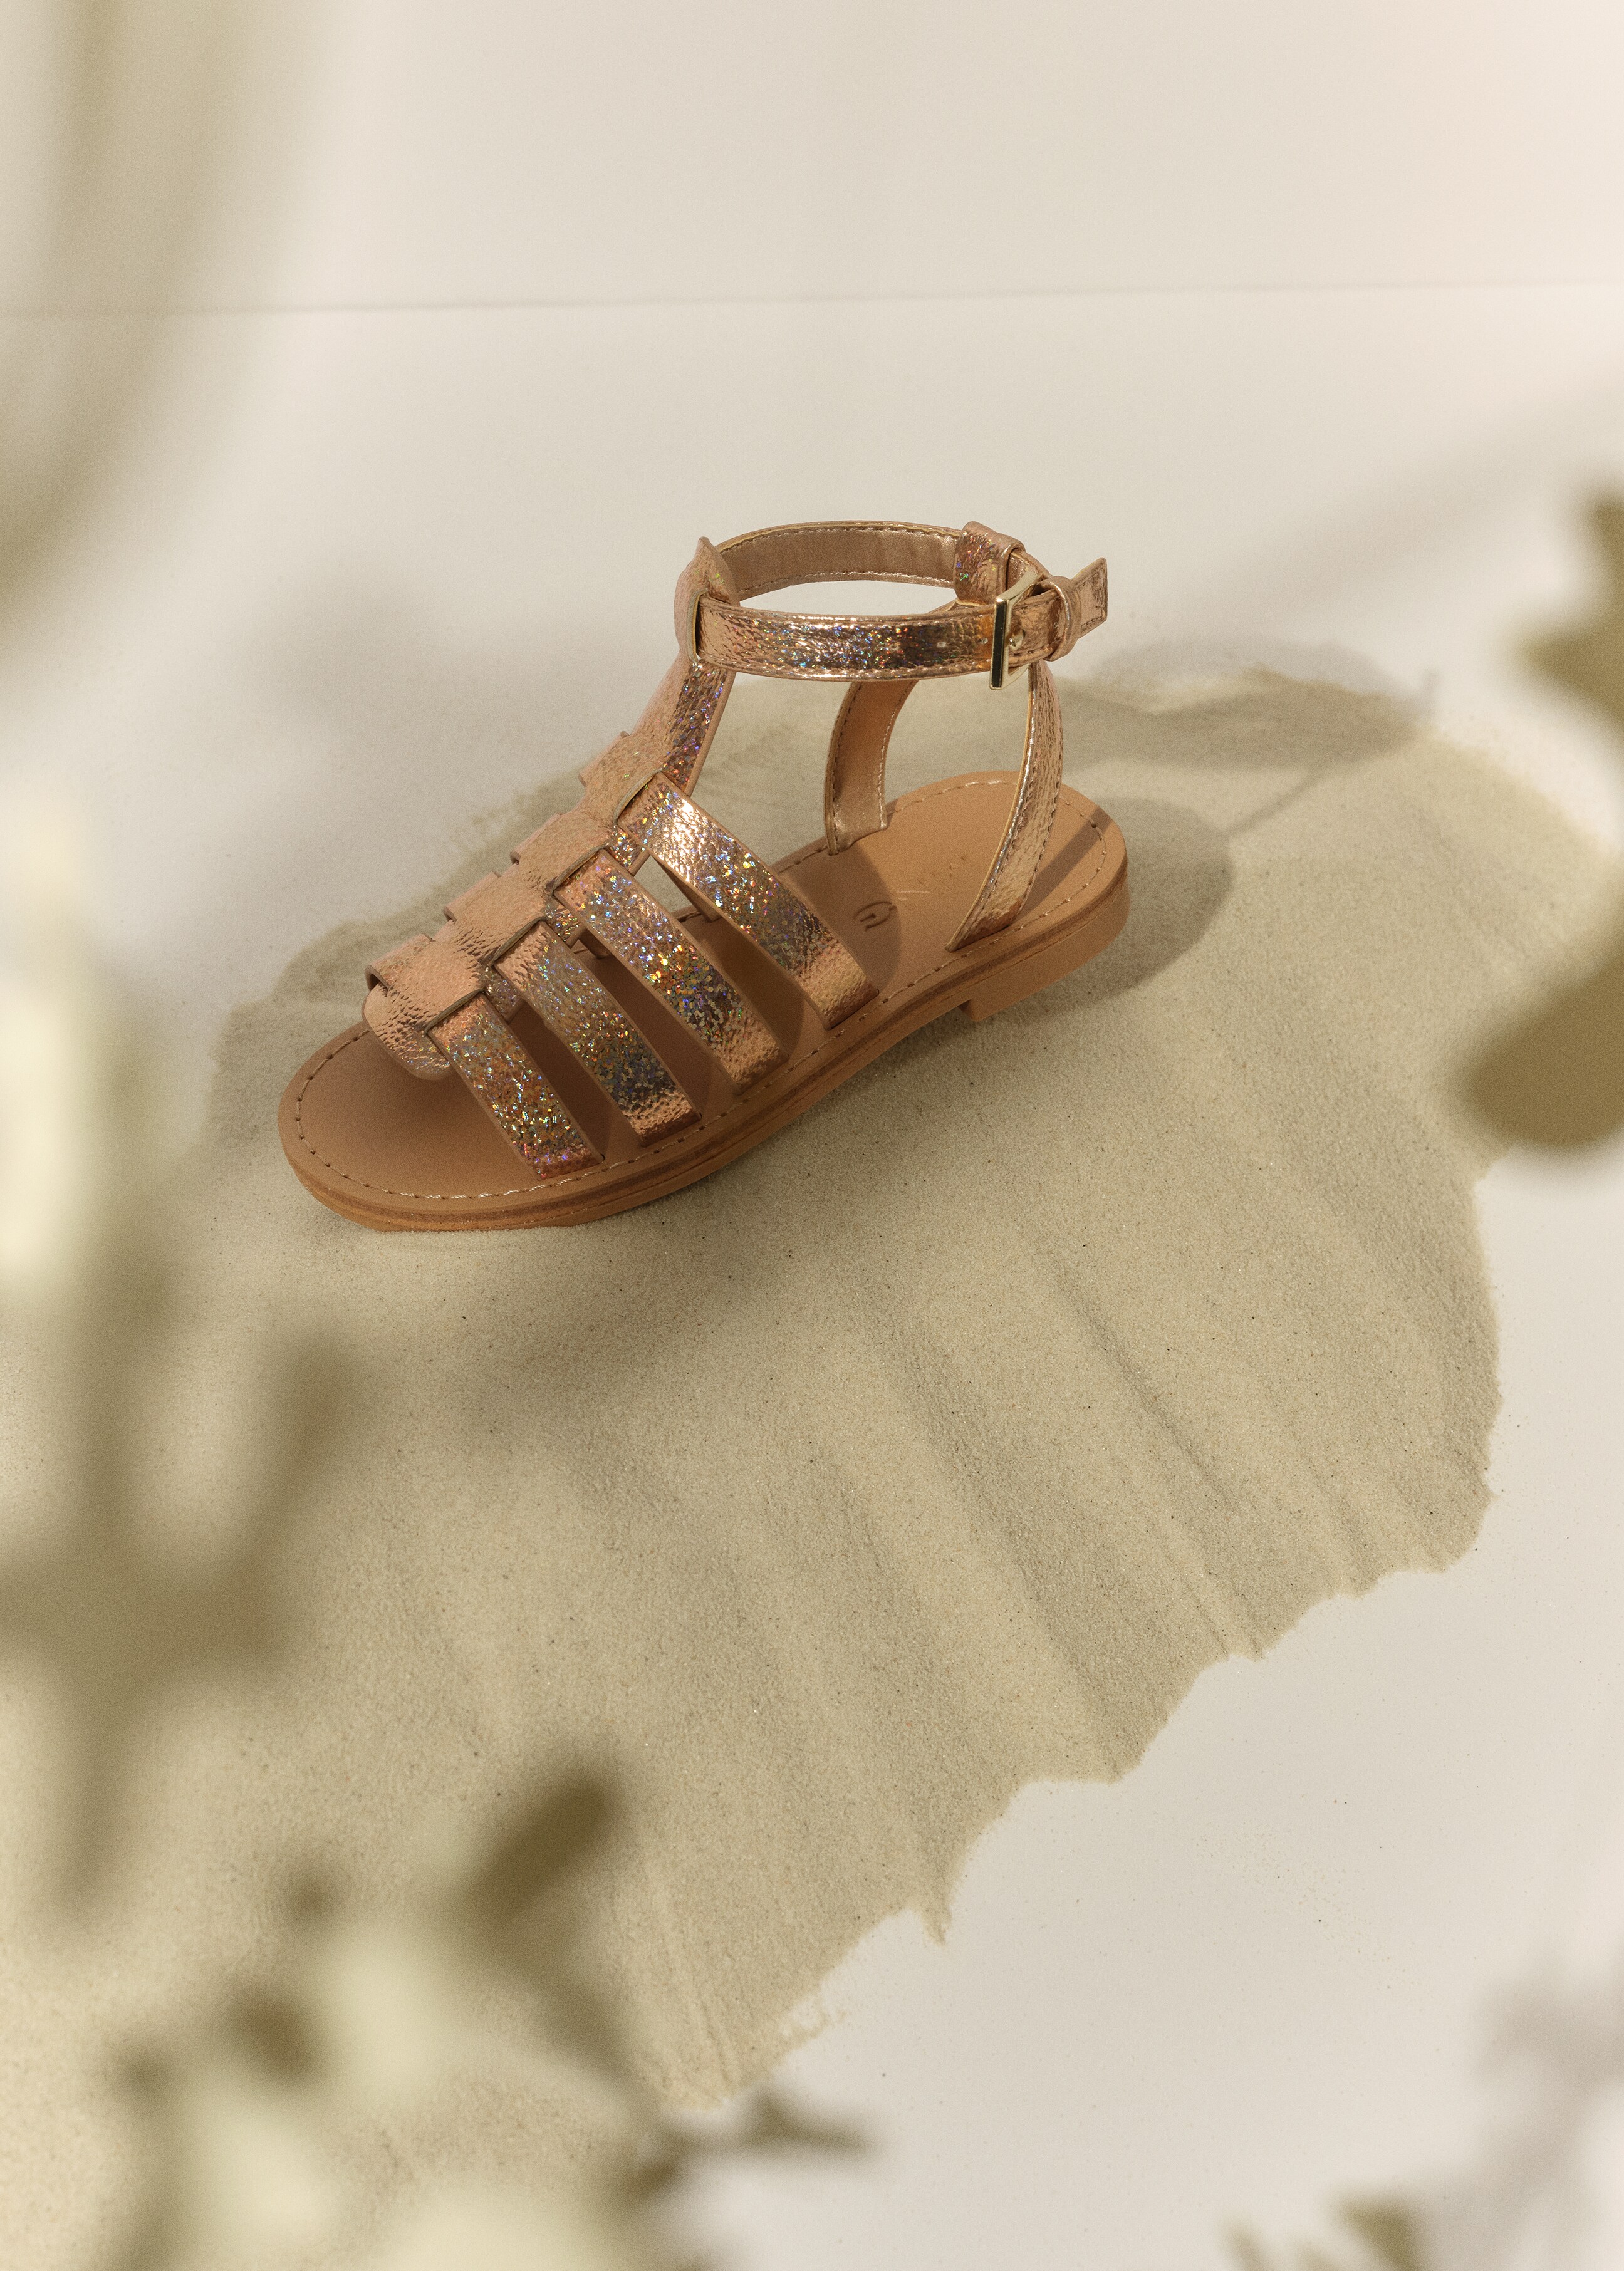 Buckle strap sandals - Details of the article 7